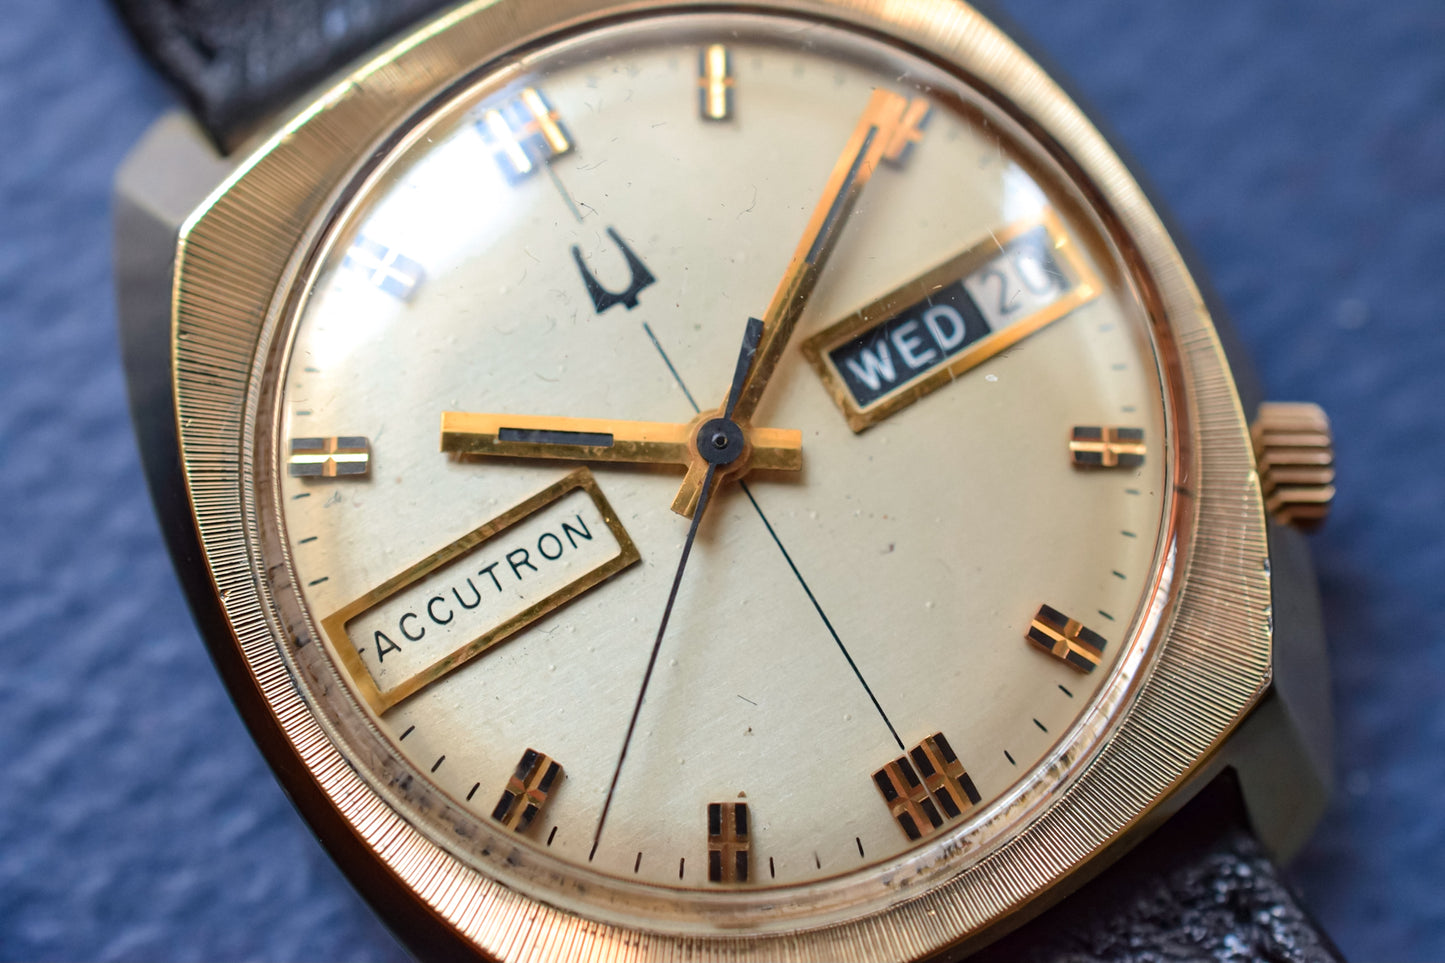 Listing for Yenli - 1976 Accutron Day-Date